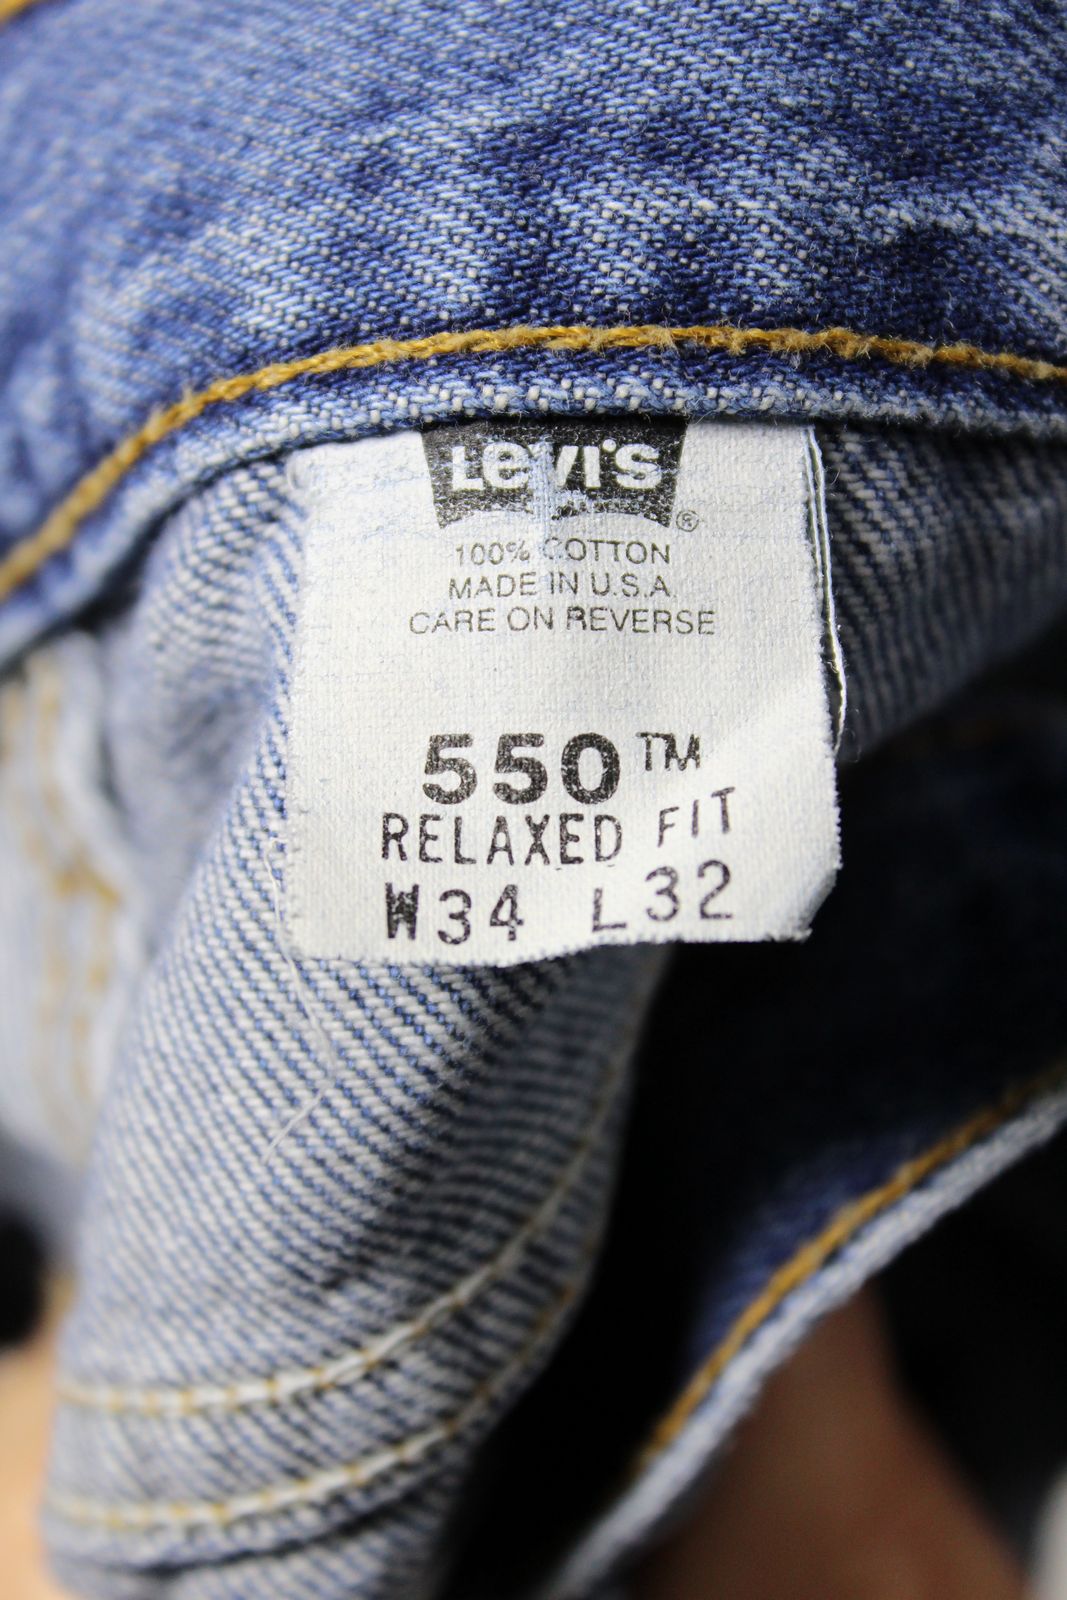 Levi's 550 Relaxed Fit Made In USA W34 L32 Jeans Vintage